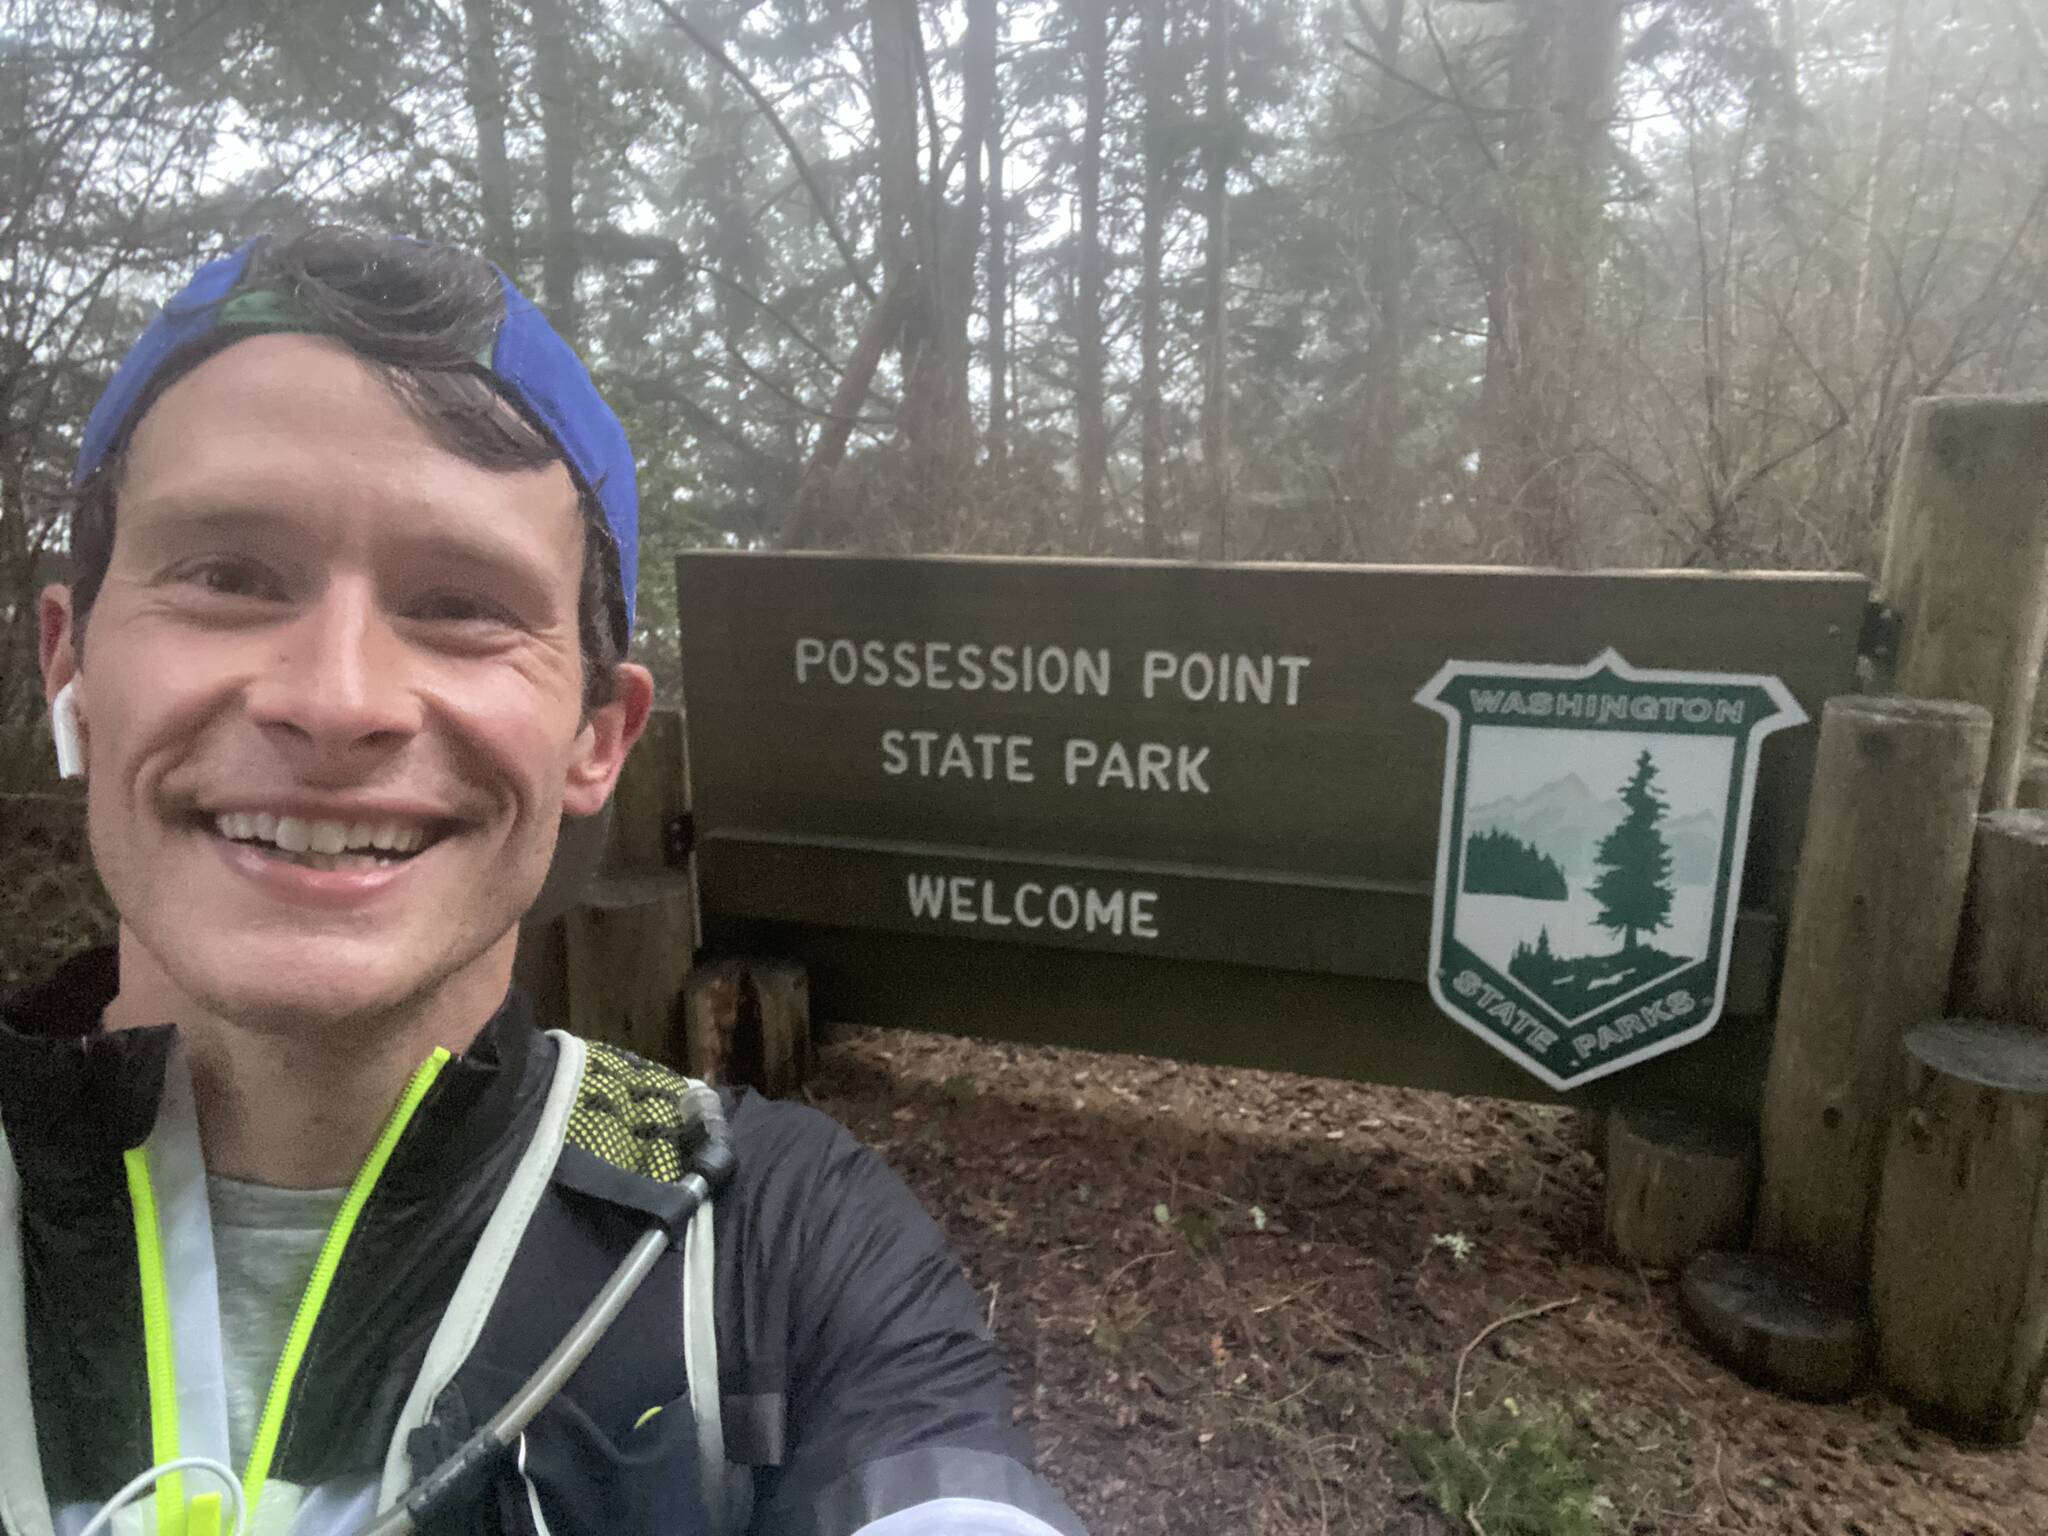 Photo provided
Ultramarathon runner Greg Nance ran the entire length of Whidbey Island Jan. 15, covering 54 miles in the process. His finish line was at Possession Point State Park in Clinton.